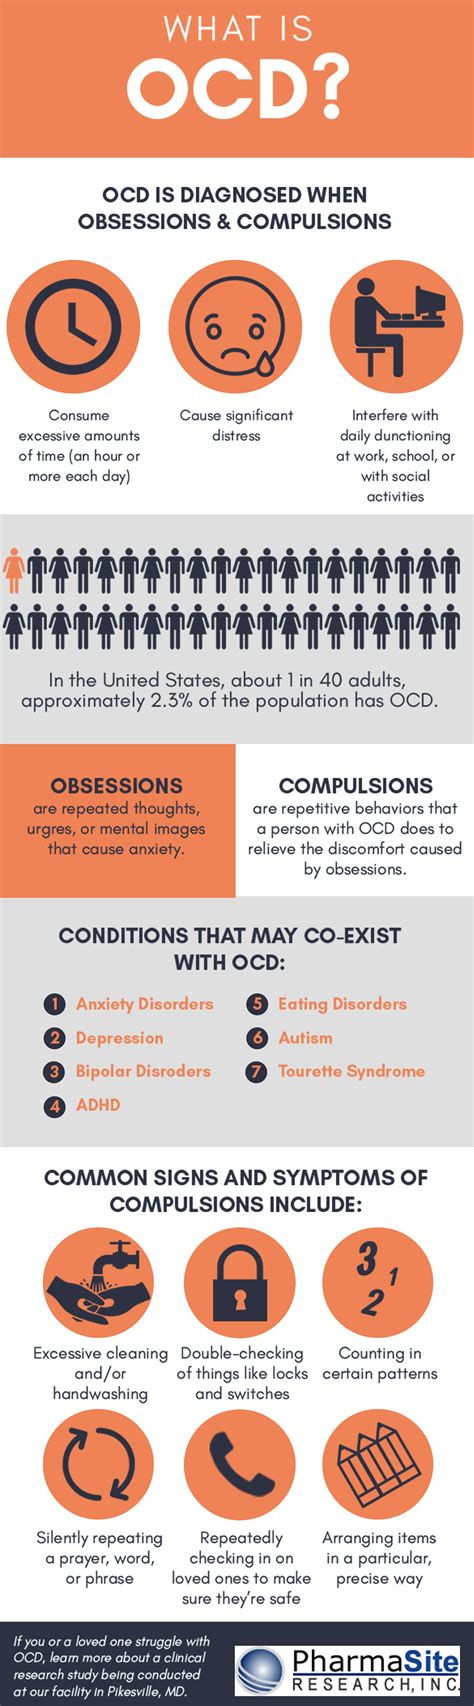 ocd infographic pharmasite research